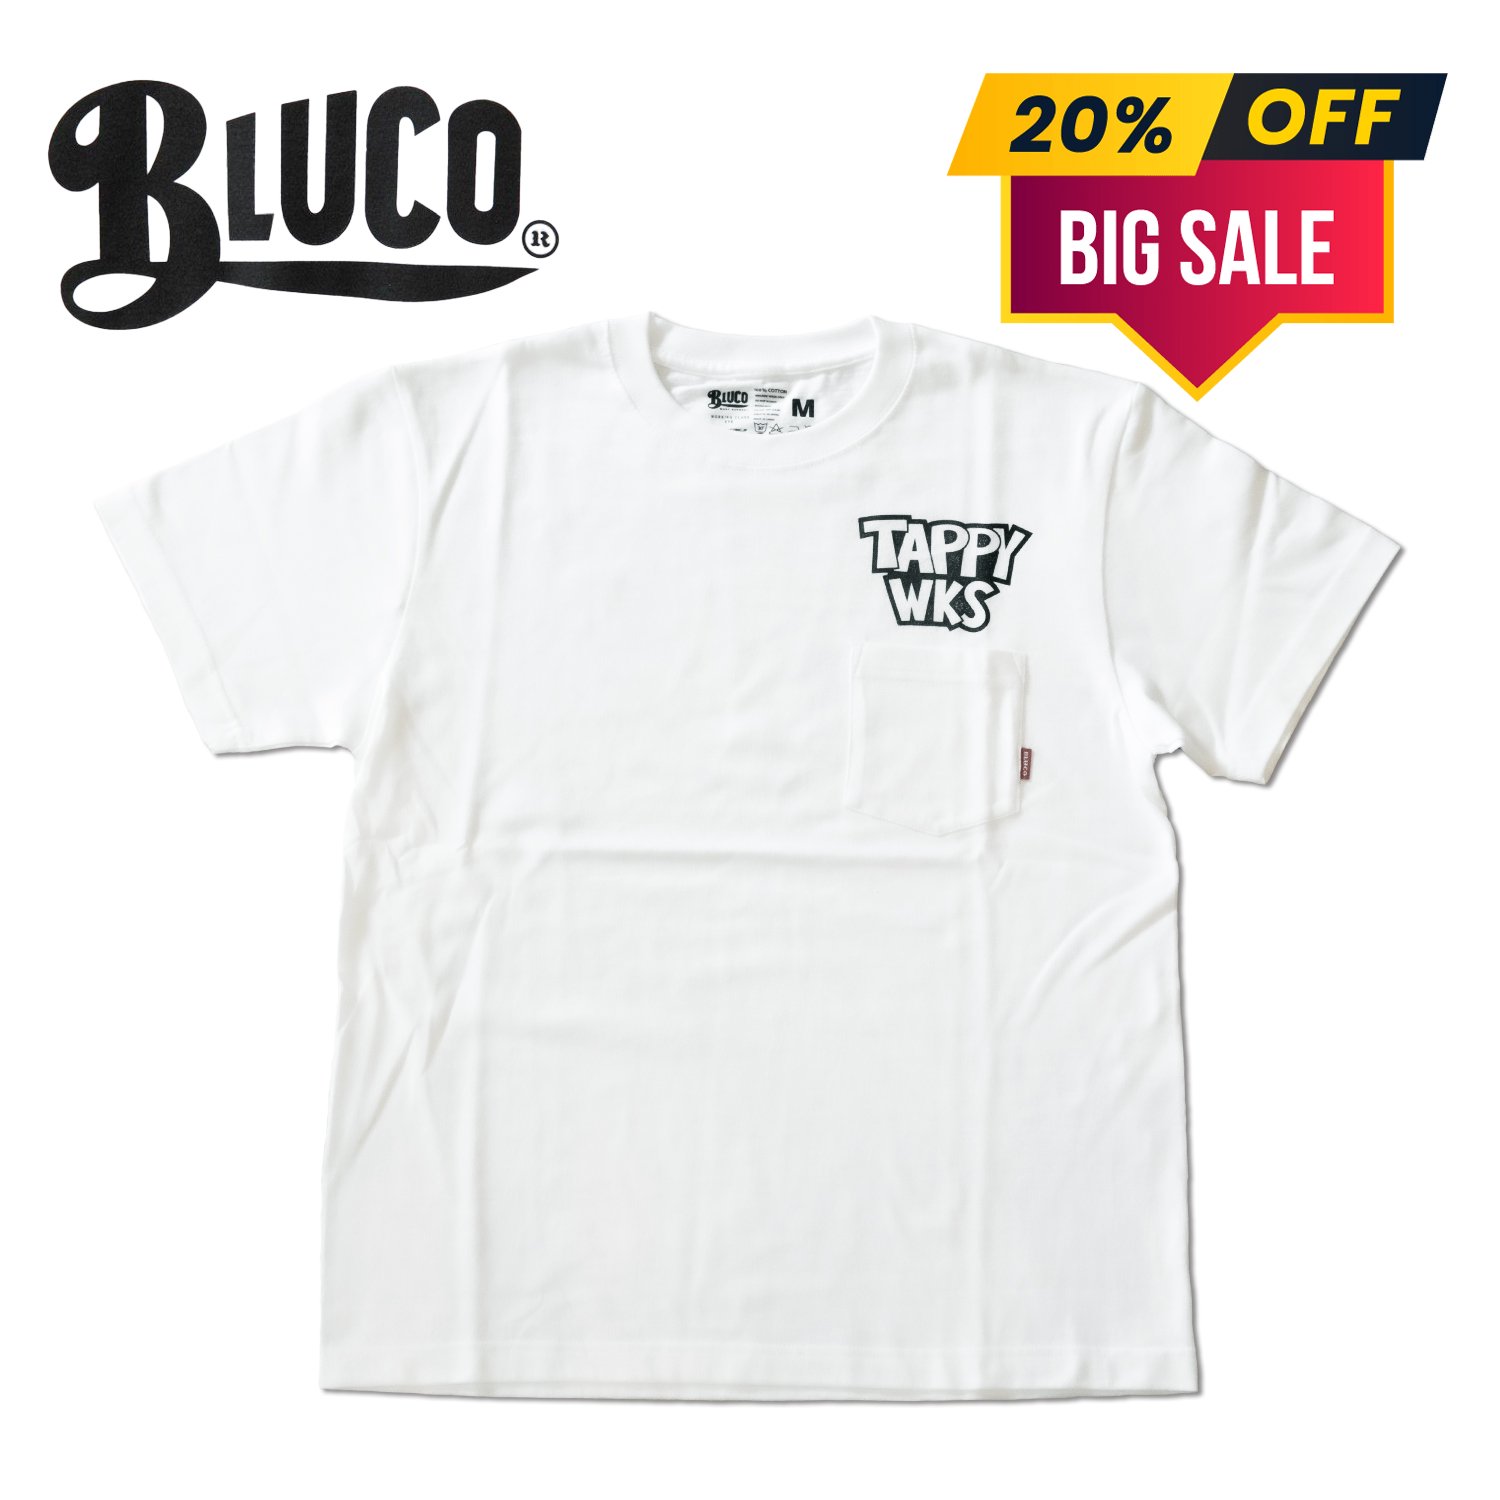 <img class='new_mark_img1' src='https://img.shop-pro.jp/img/new/icons43.gif' style='border:none;display:inline;margin:0px;padding:0px;width:auto;' />TAPPY WORKERS × BLUCO T-shirt【Chest pocket】 (WHT / 1サイズ)